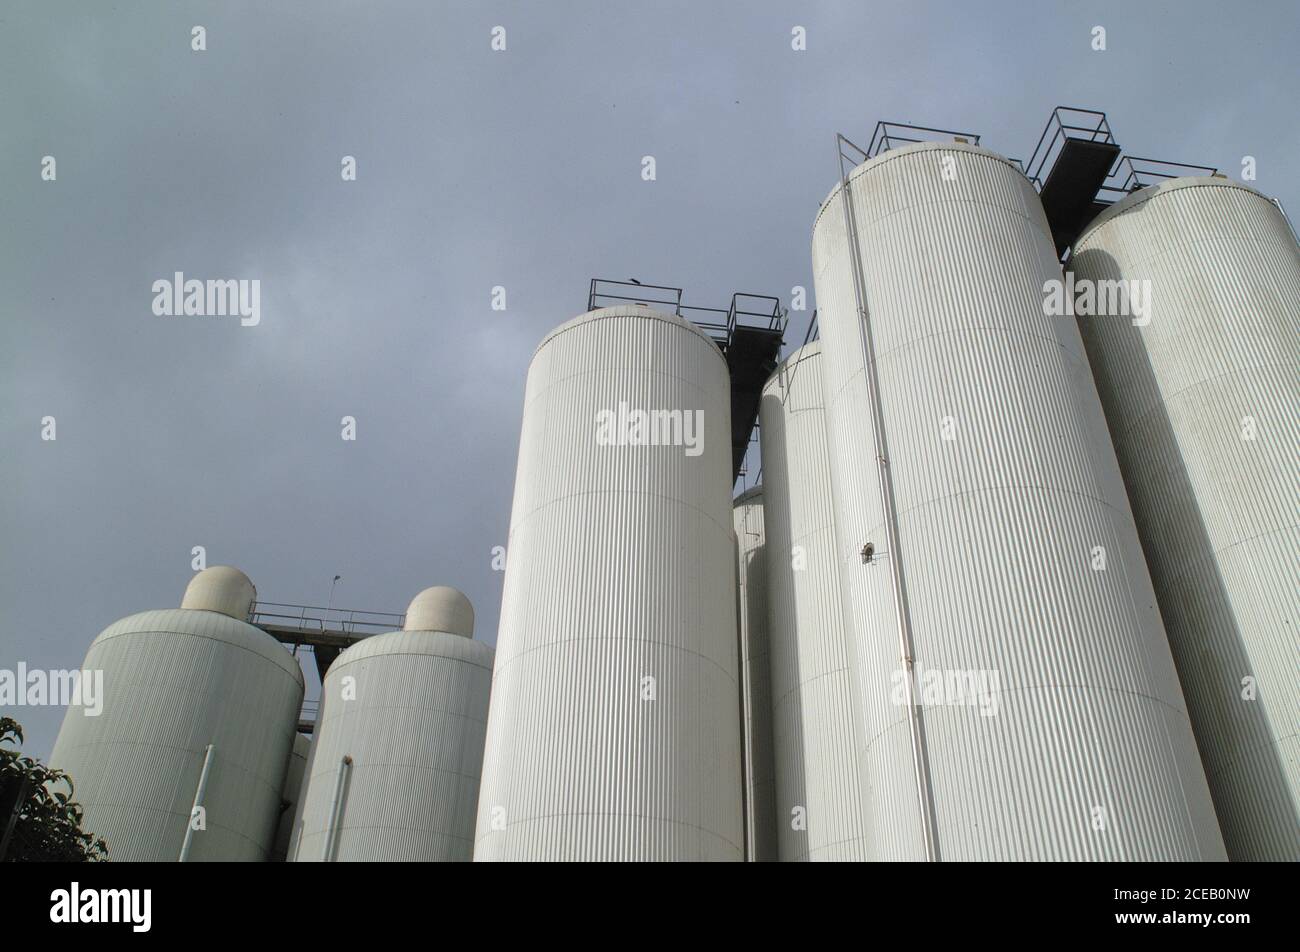 From below view of high cylinder white tanks placed outside on background of gloomy cloudy sky Stock Photo